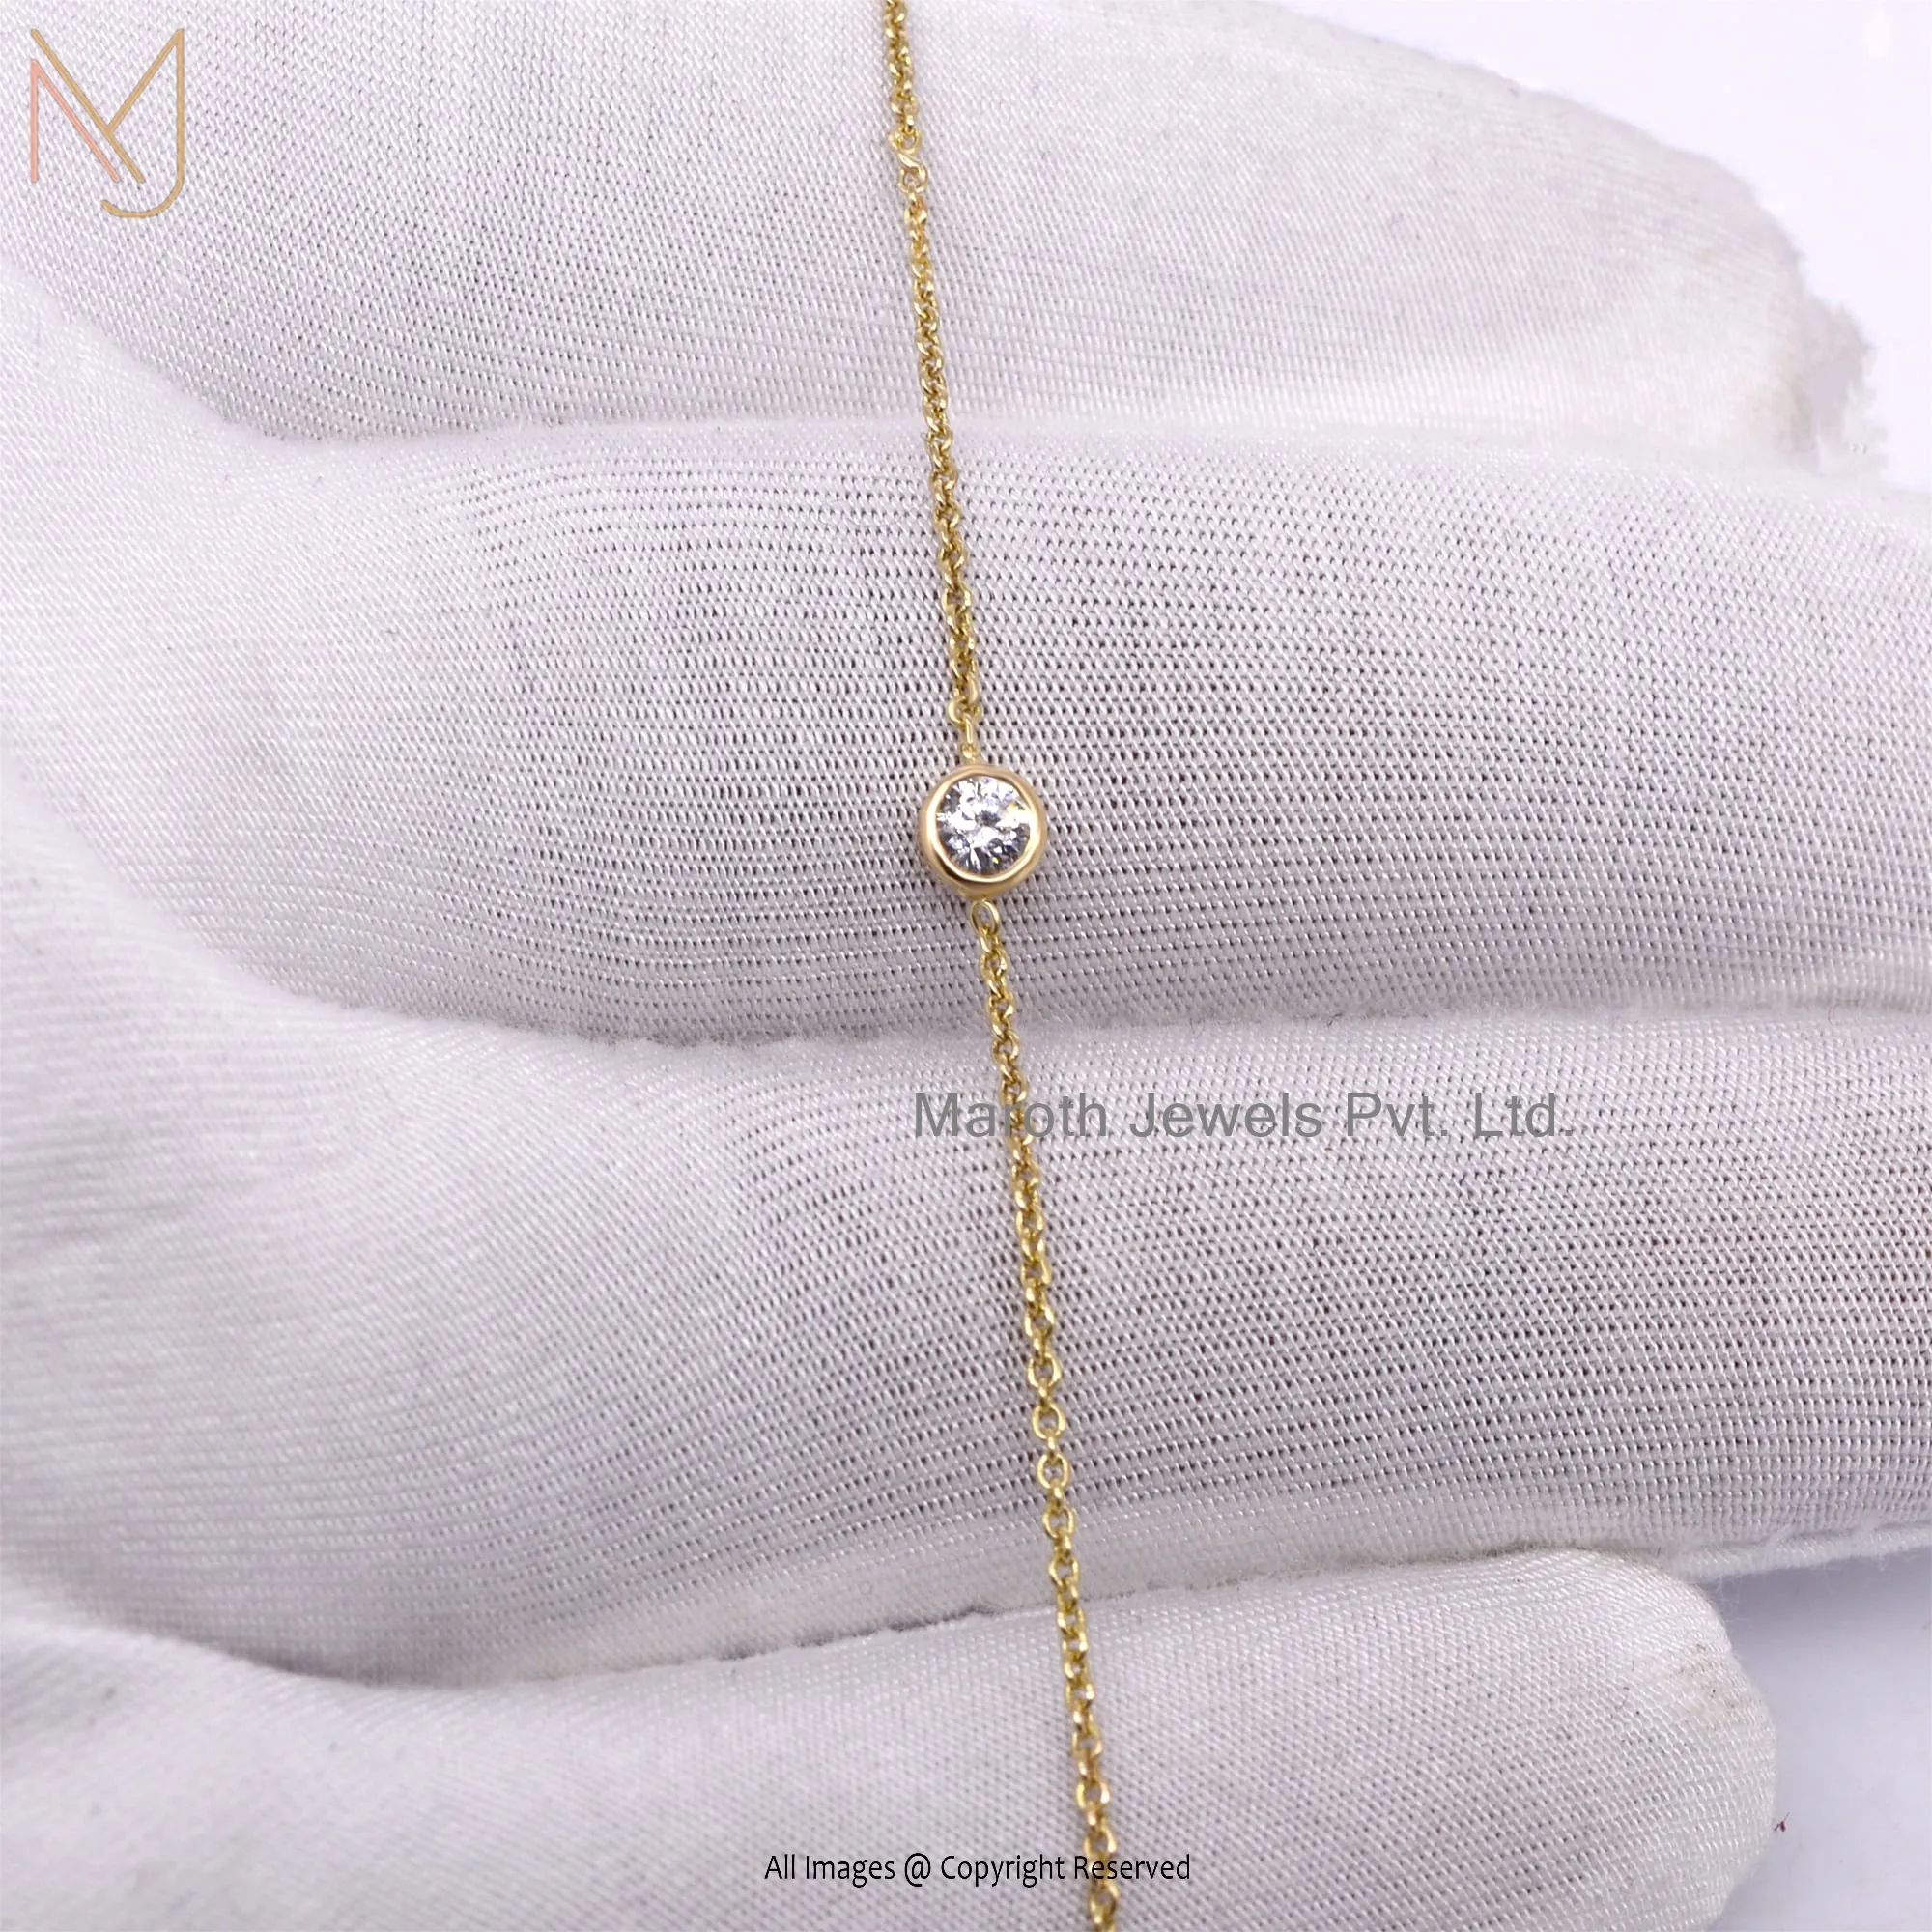 Wholesale 14k Yellow gold Plated SI GH Diamond Curb Man's Chain Bracelet